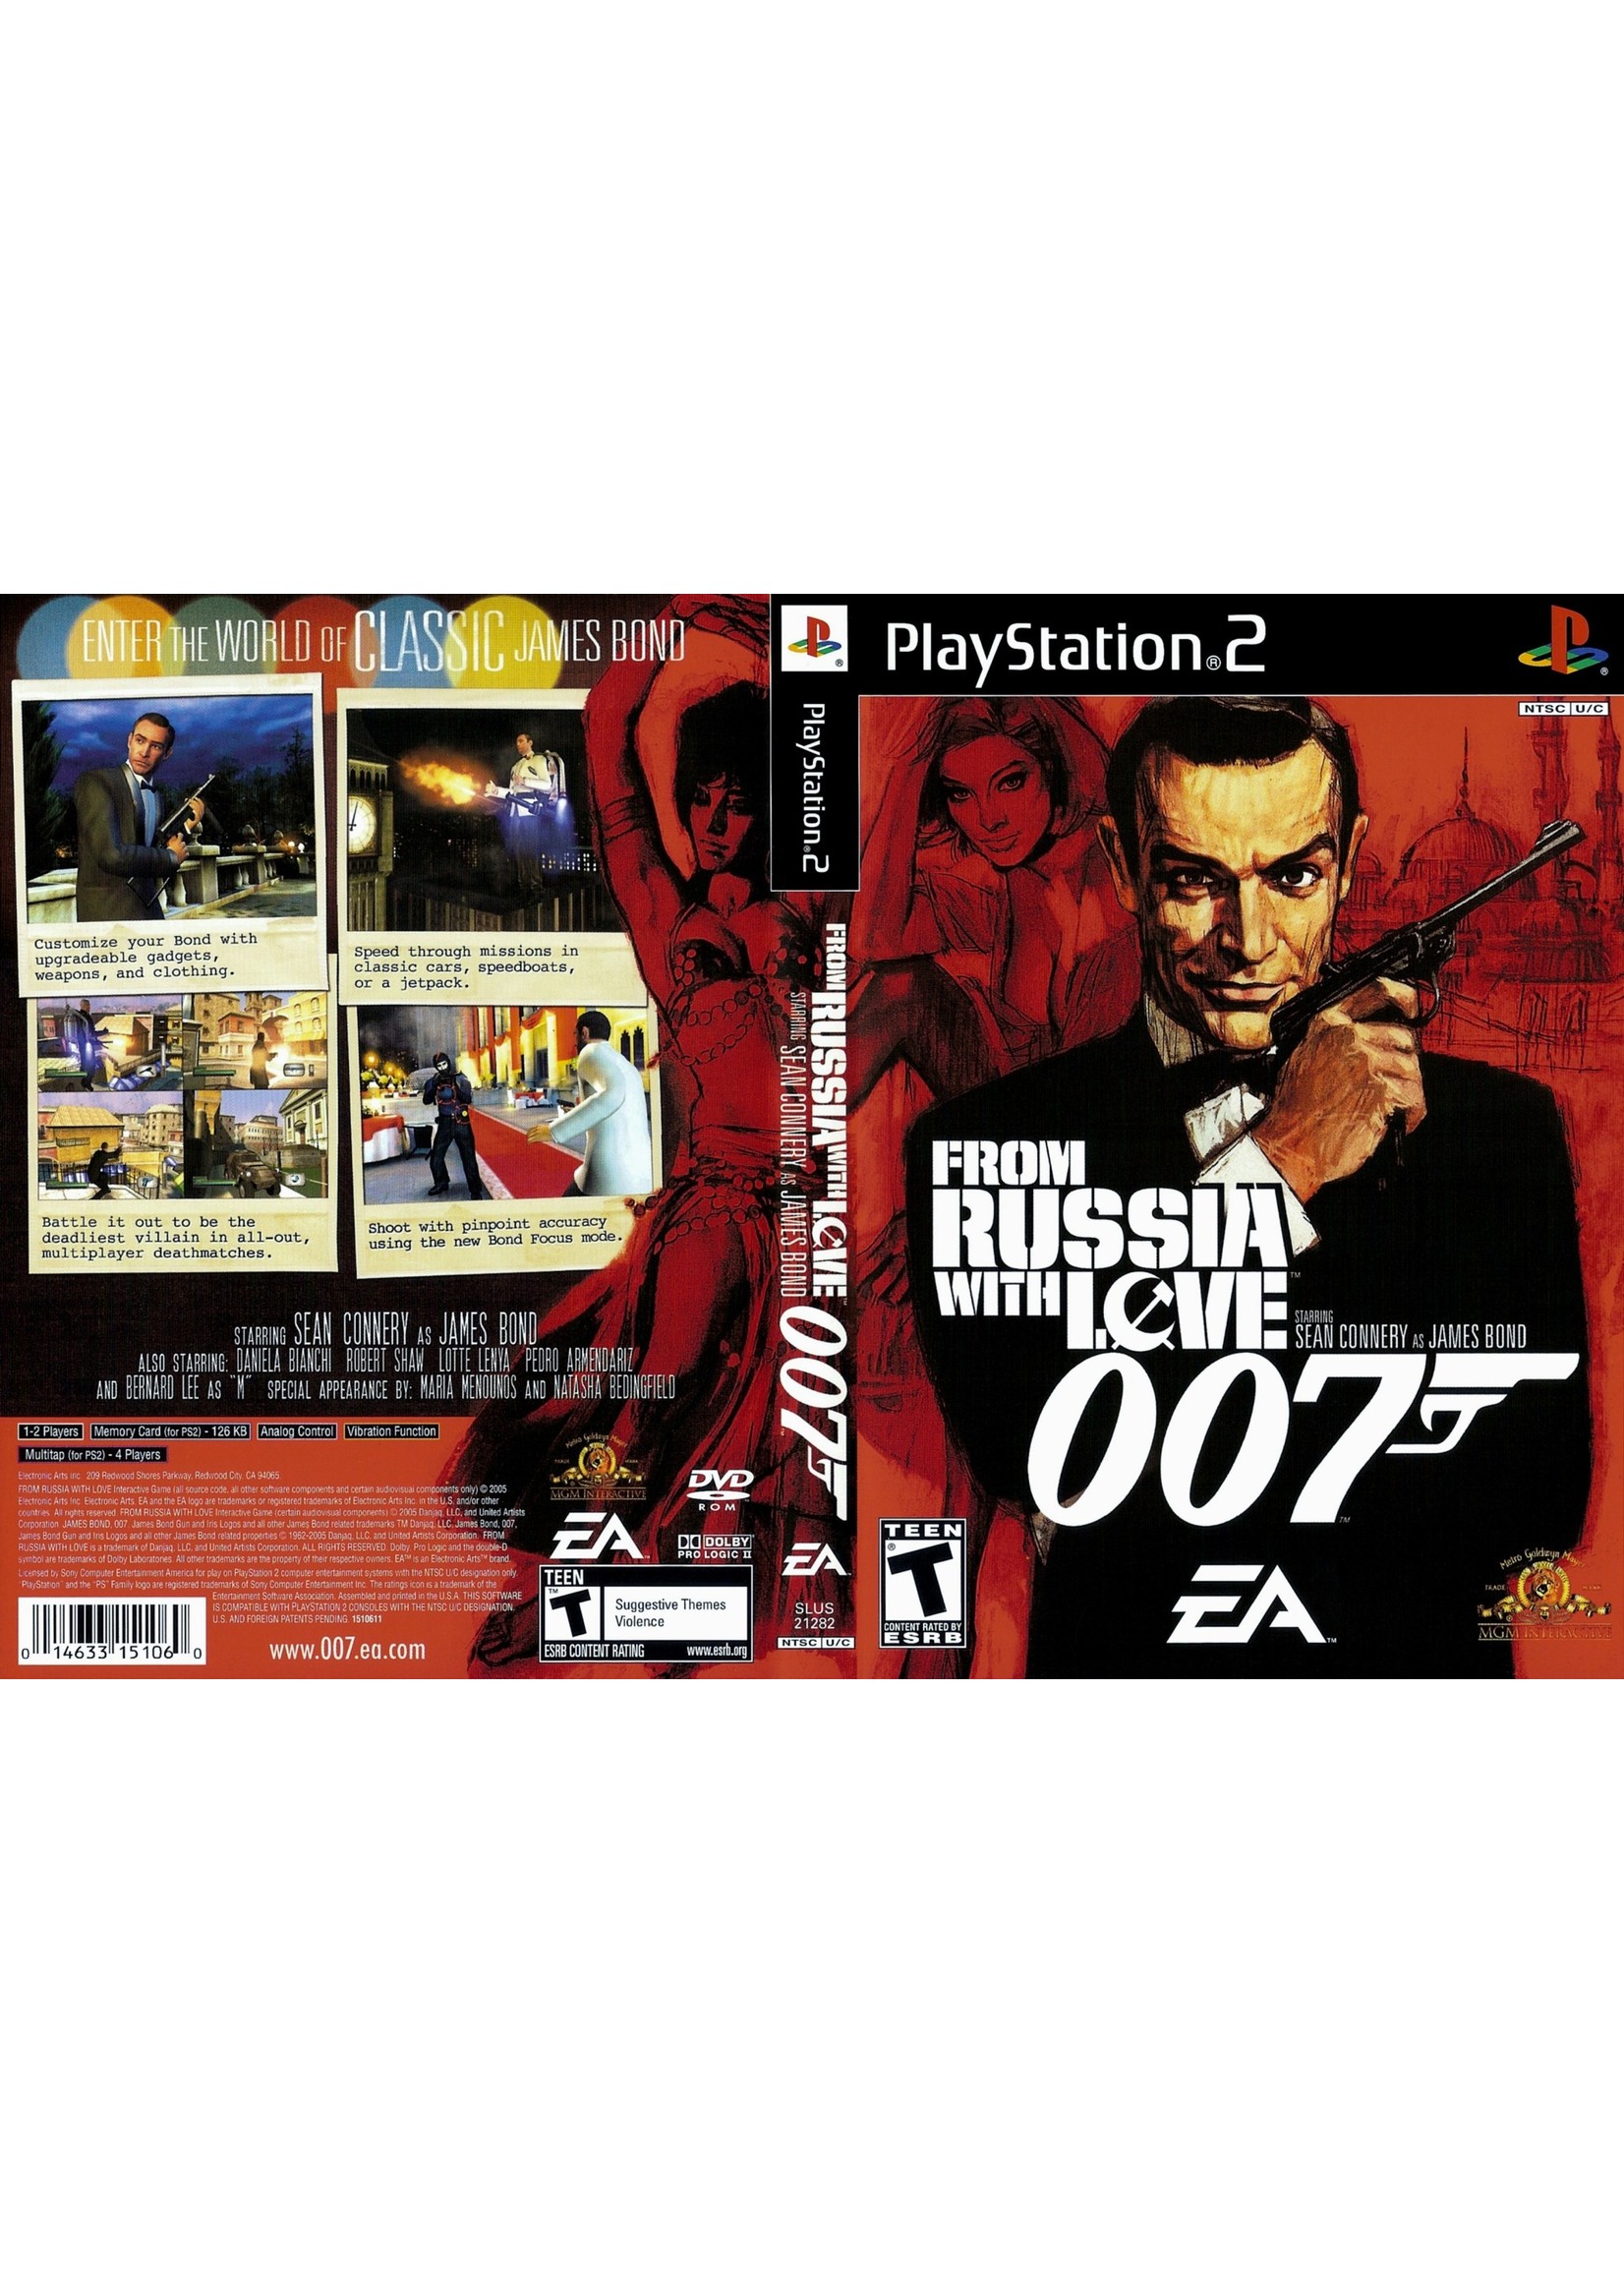 Sony Playstation 2 (PS2) 007 From Russia With Love